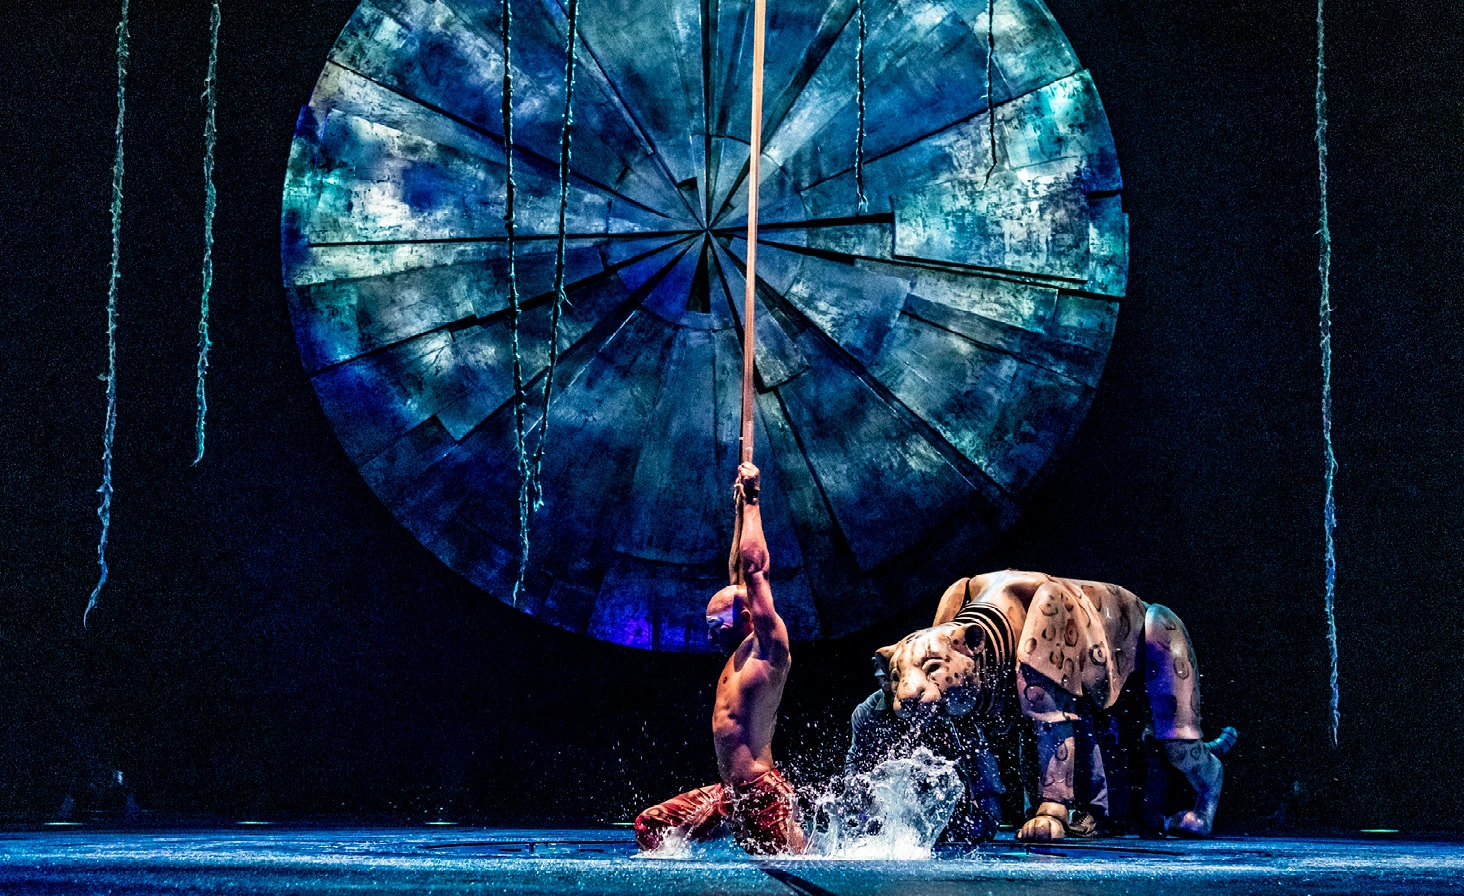 LUZIA: What to expect - 7